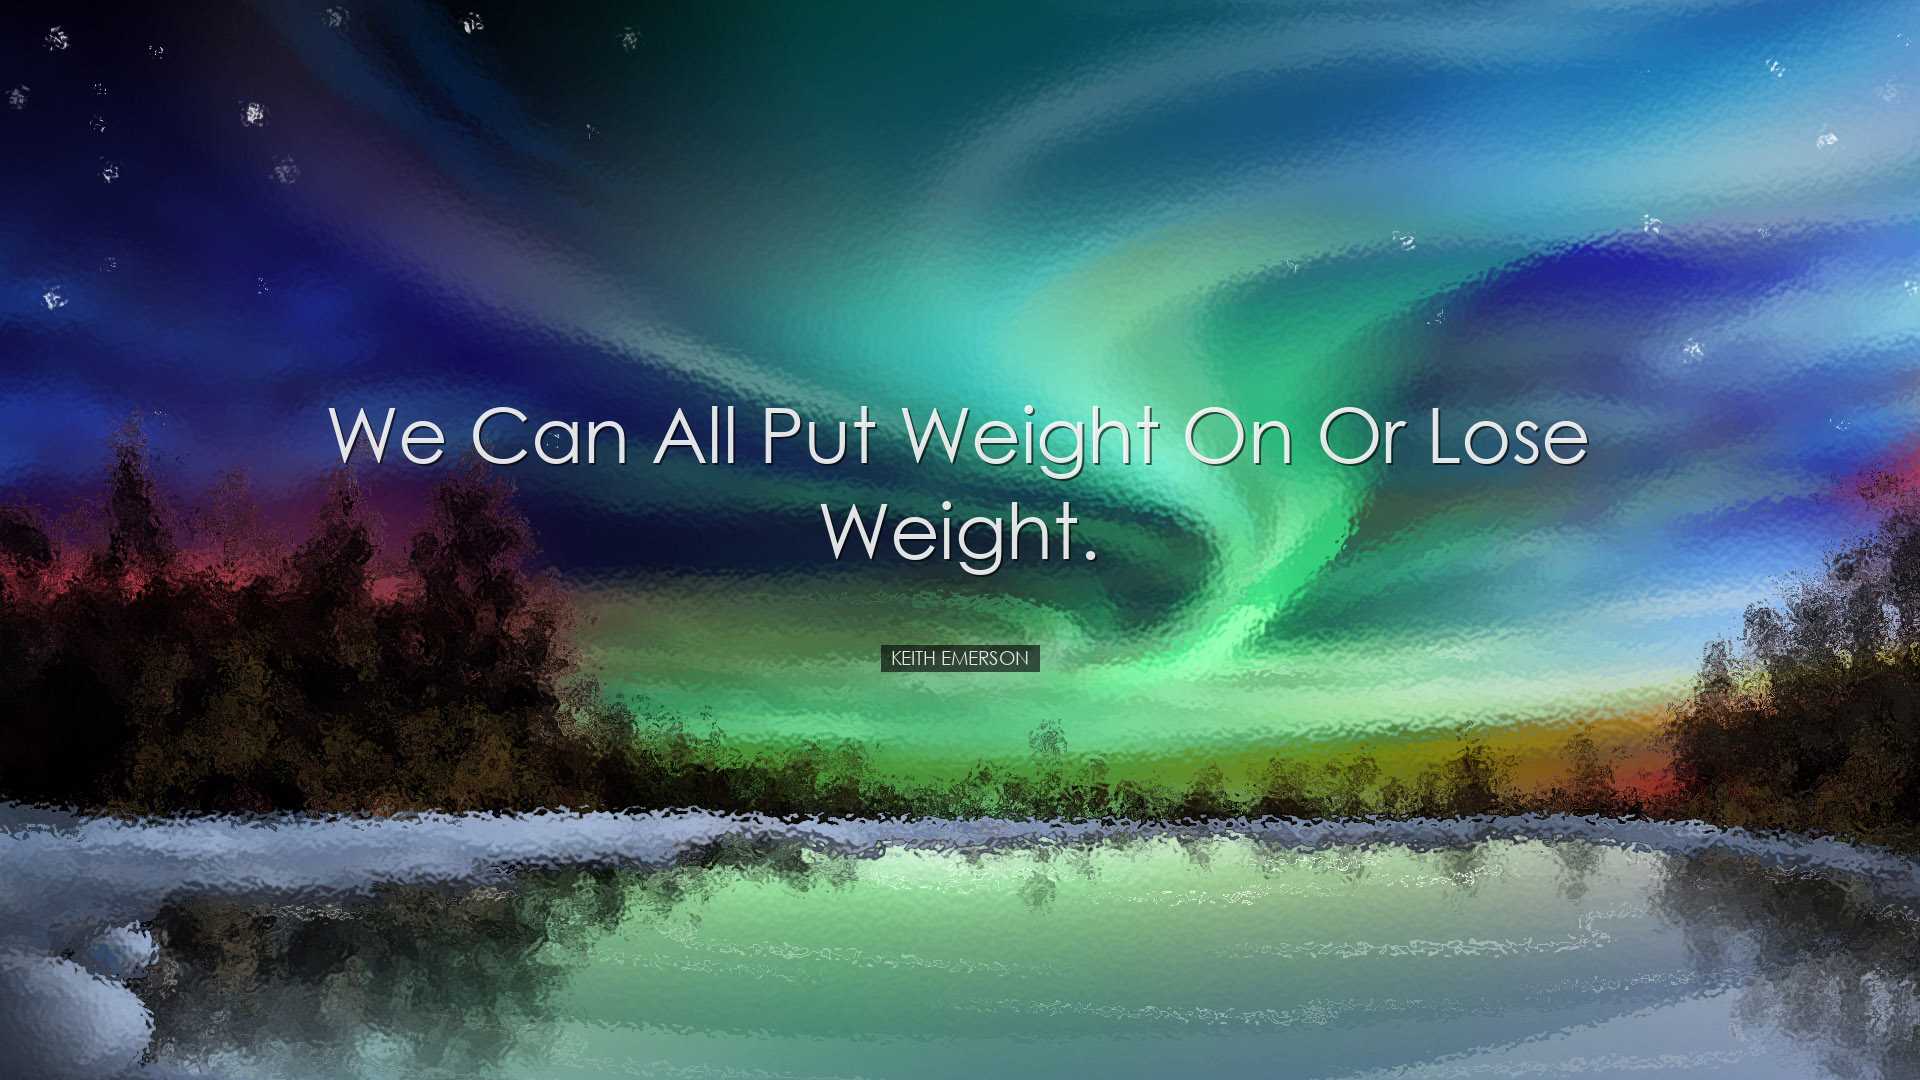 We can all put weight on or lose weight. - Keith Emerson